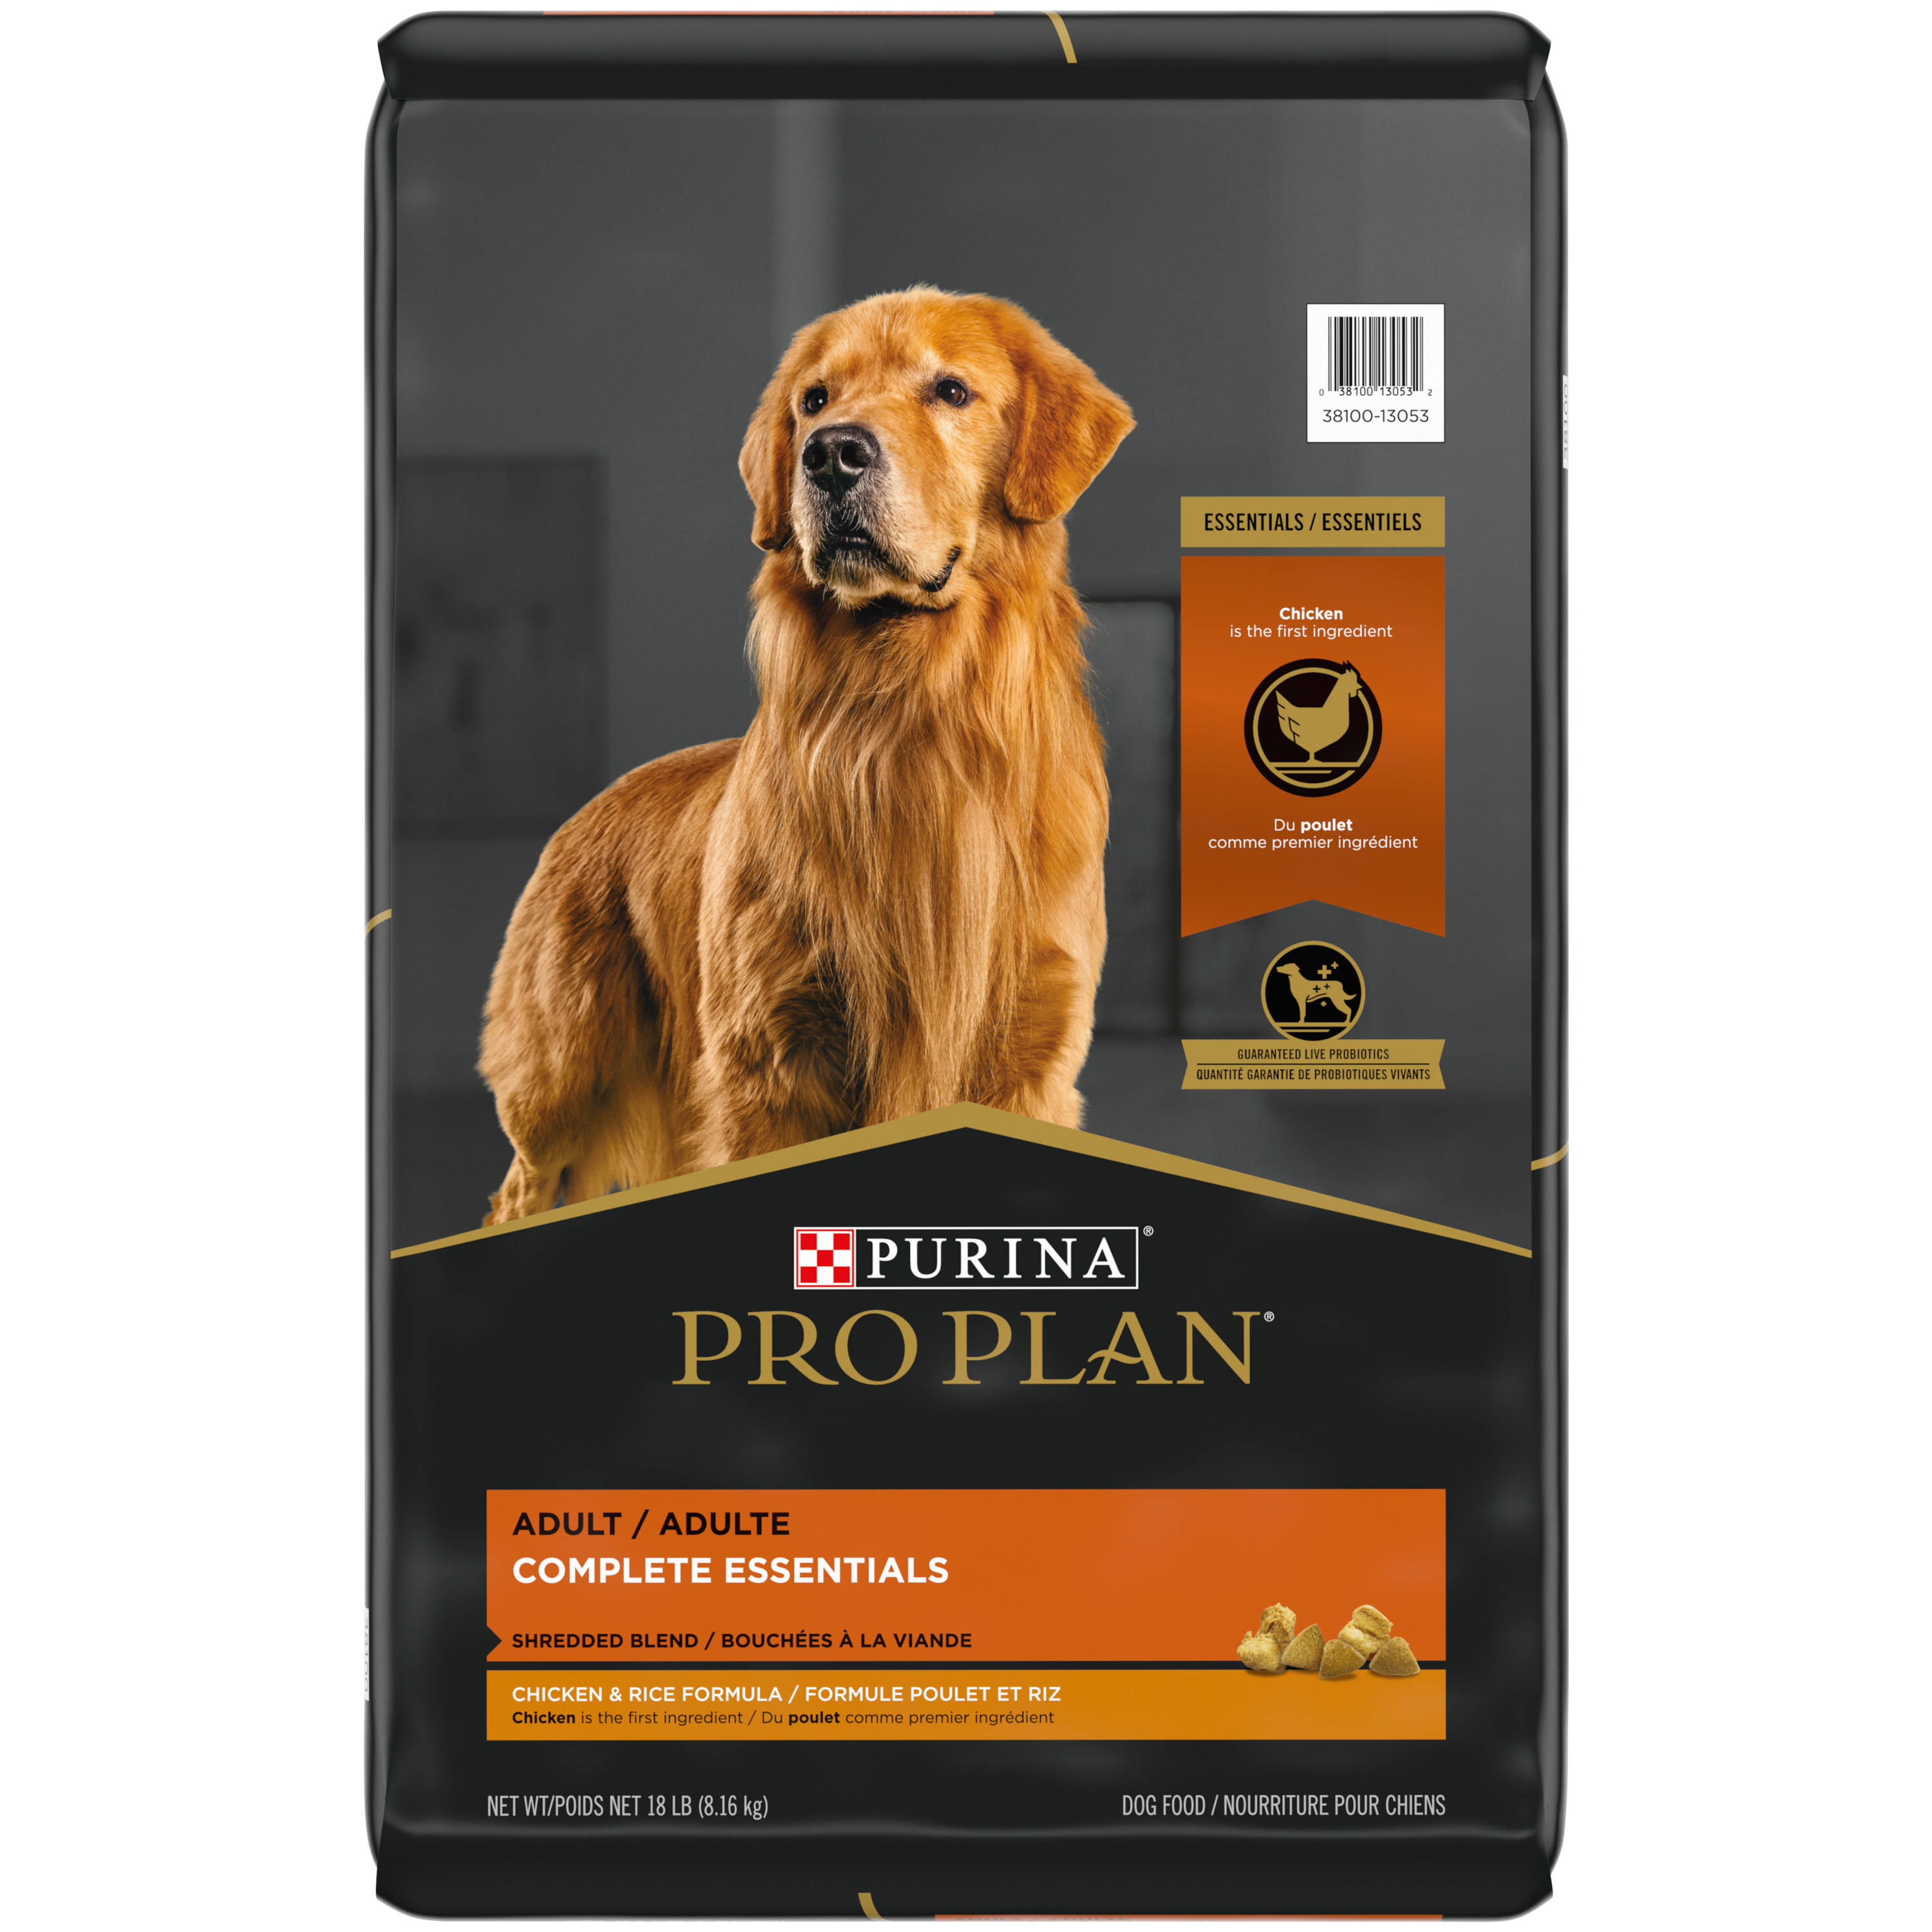 Purina Pro Plan Dry Dog Food - Shredded Blend Adult Chicken Rice, 18lbs